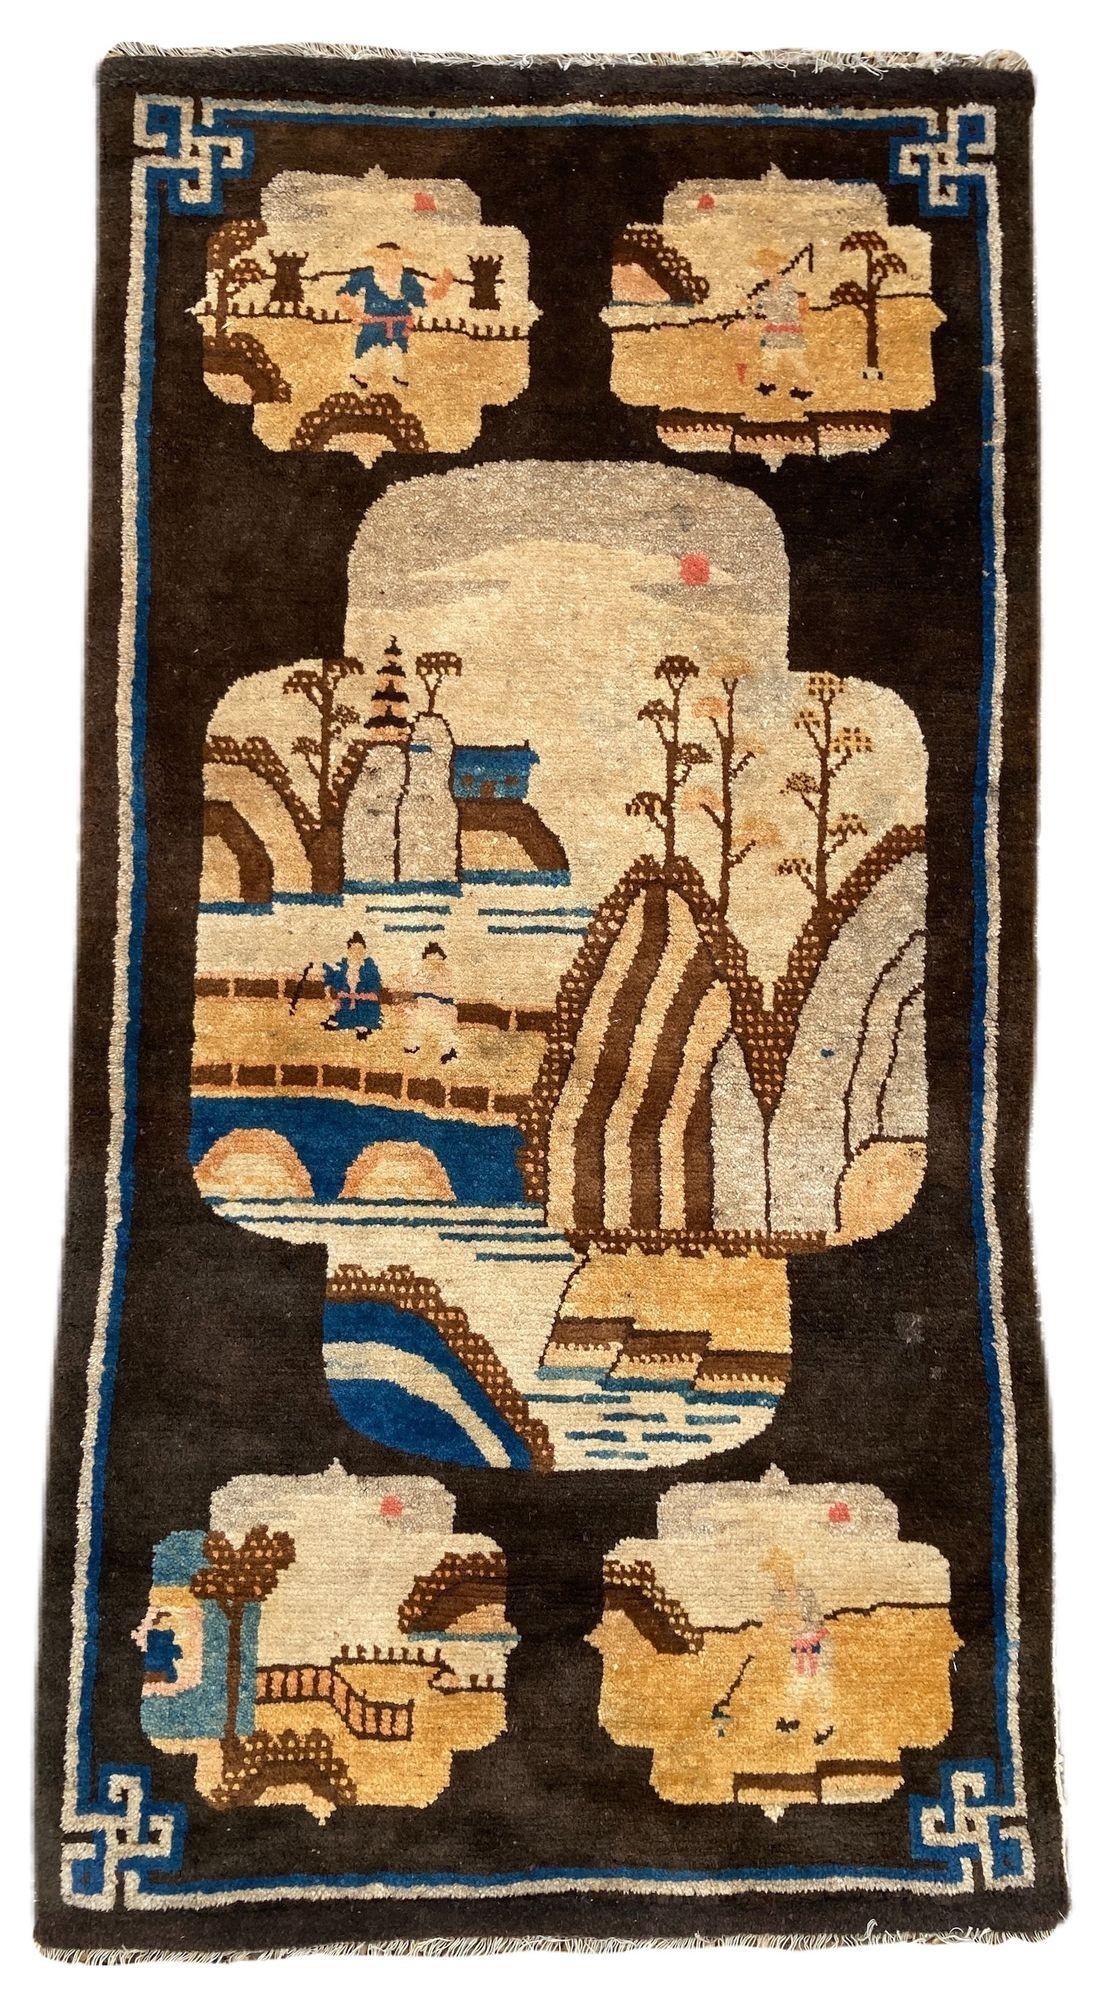 A lovely vintage Pao-Tao rug, handwoven in China circa 1940 with a traditional window design depicting five agricultural scenes on a chocolate brown field and simple border.
Size: 1.23m x 0.64m (4ft x 2ft 1in)
This rug is in good condition with